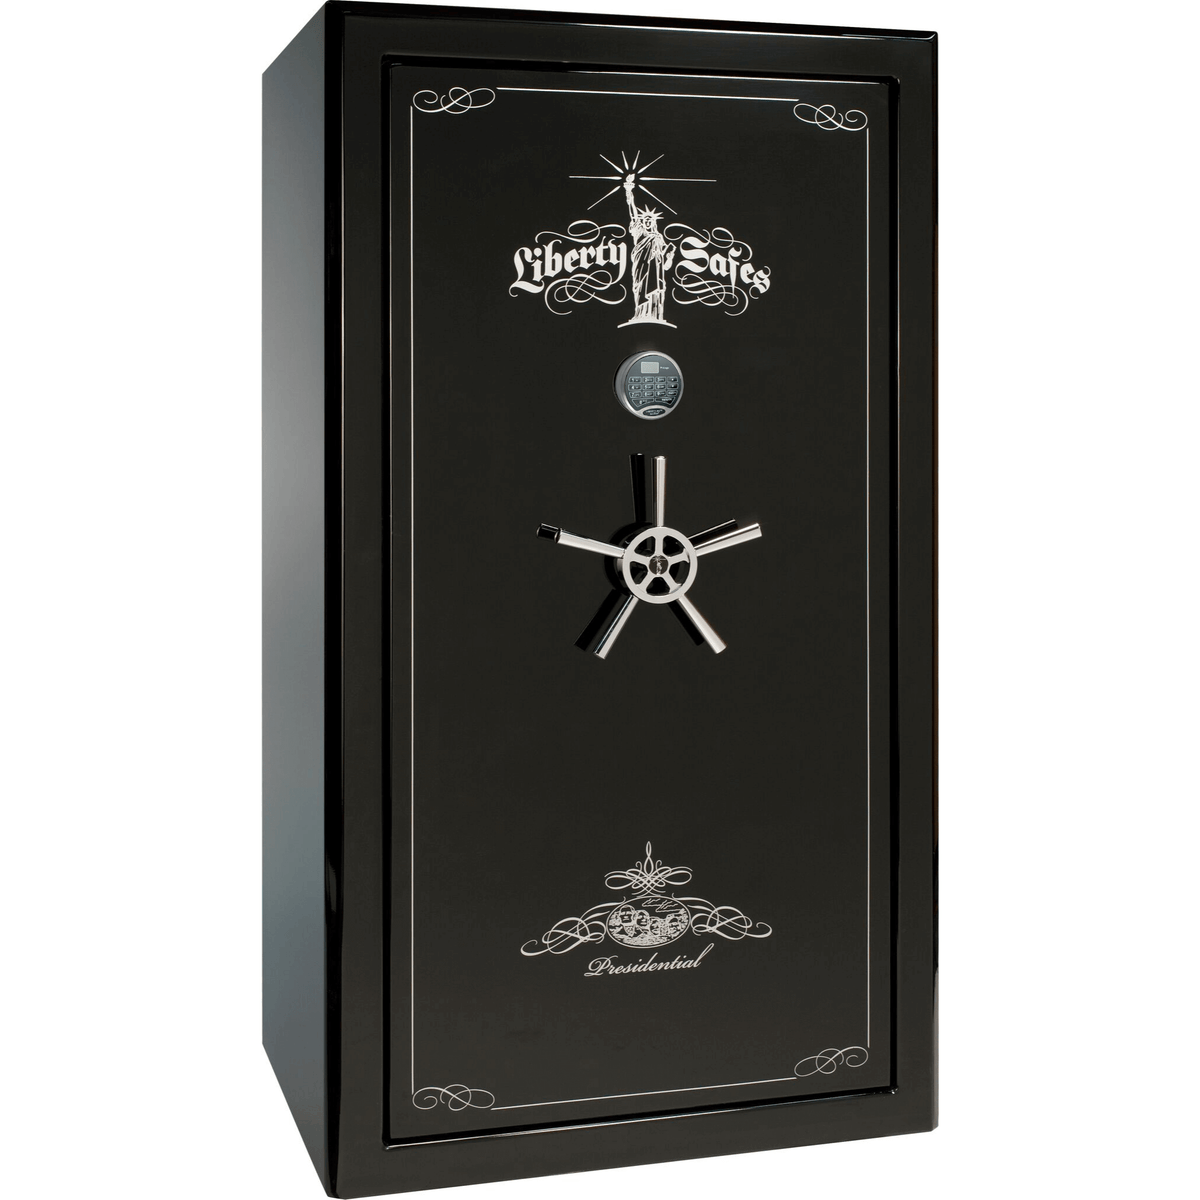 Liberty Safe Presidential 50 in Black Gloss with Chrome Electronic Lock, closed door.